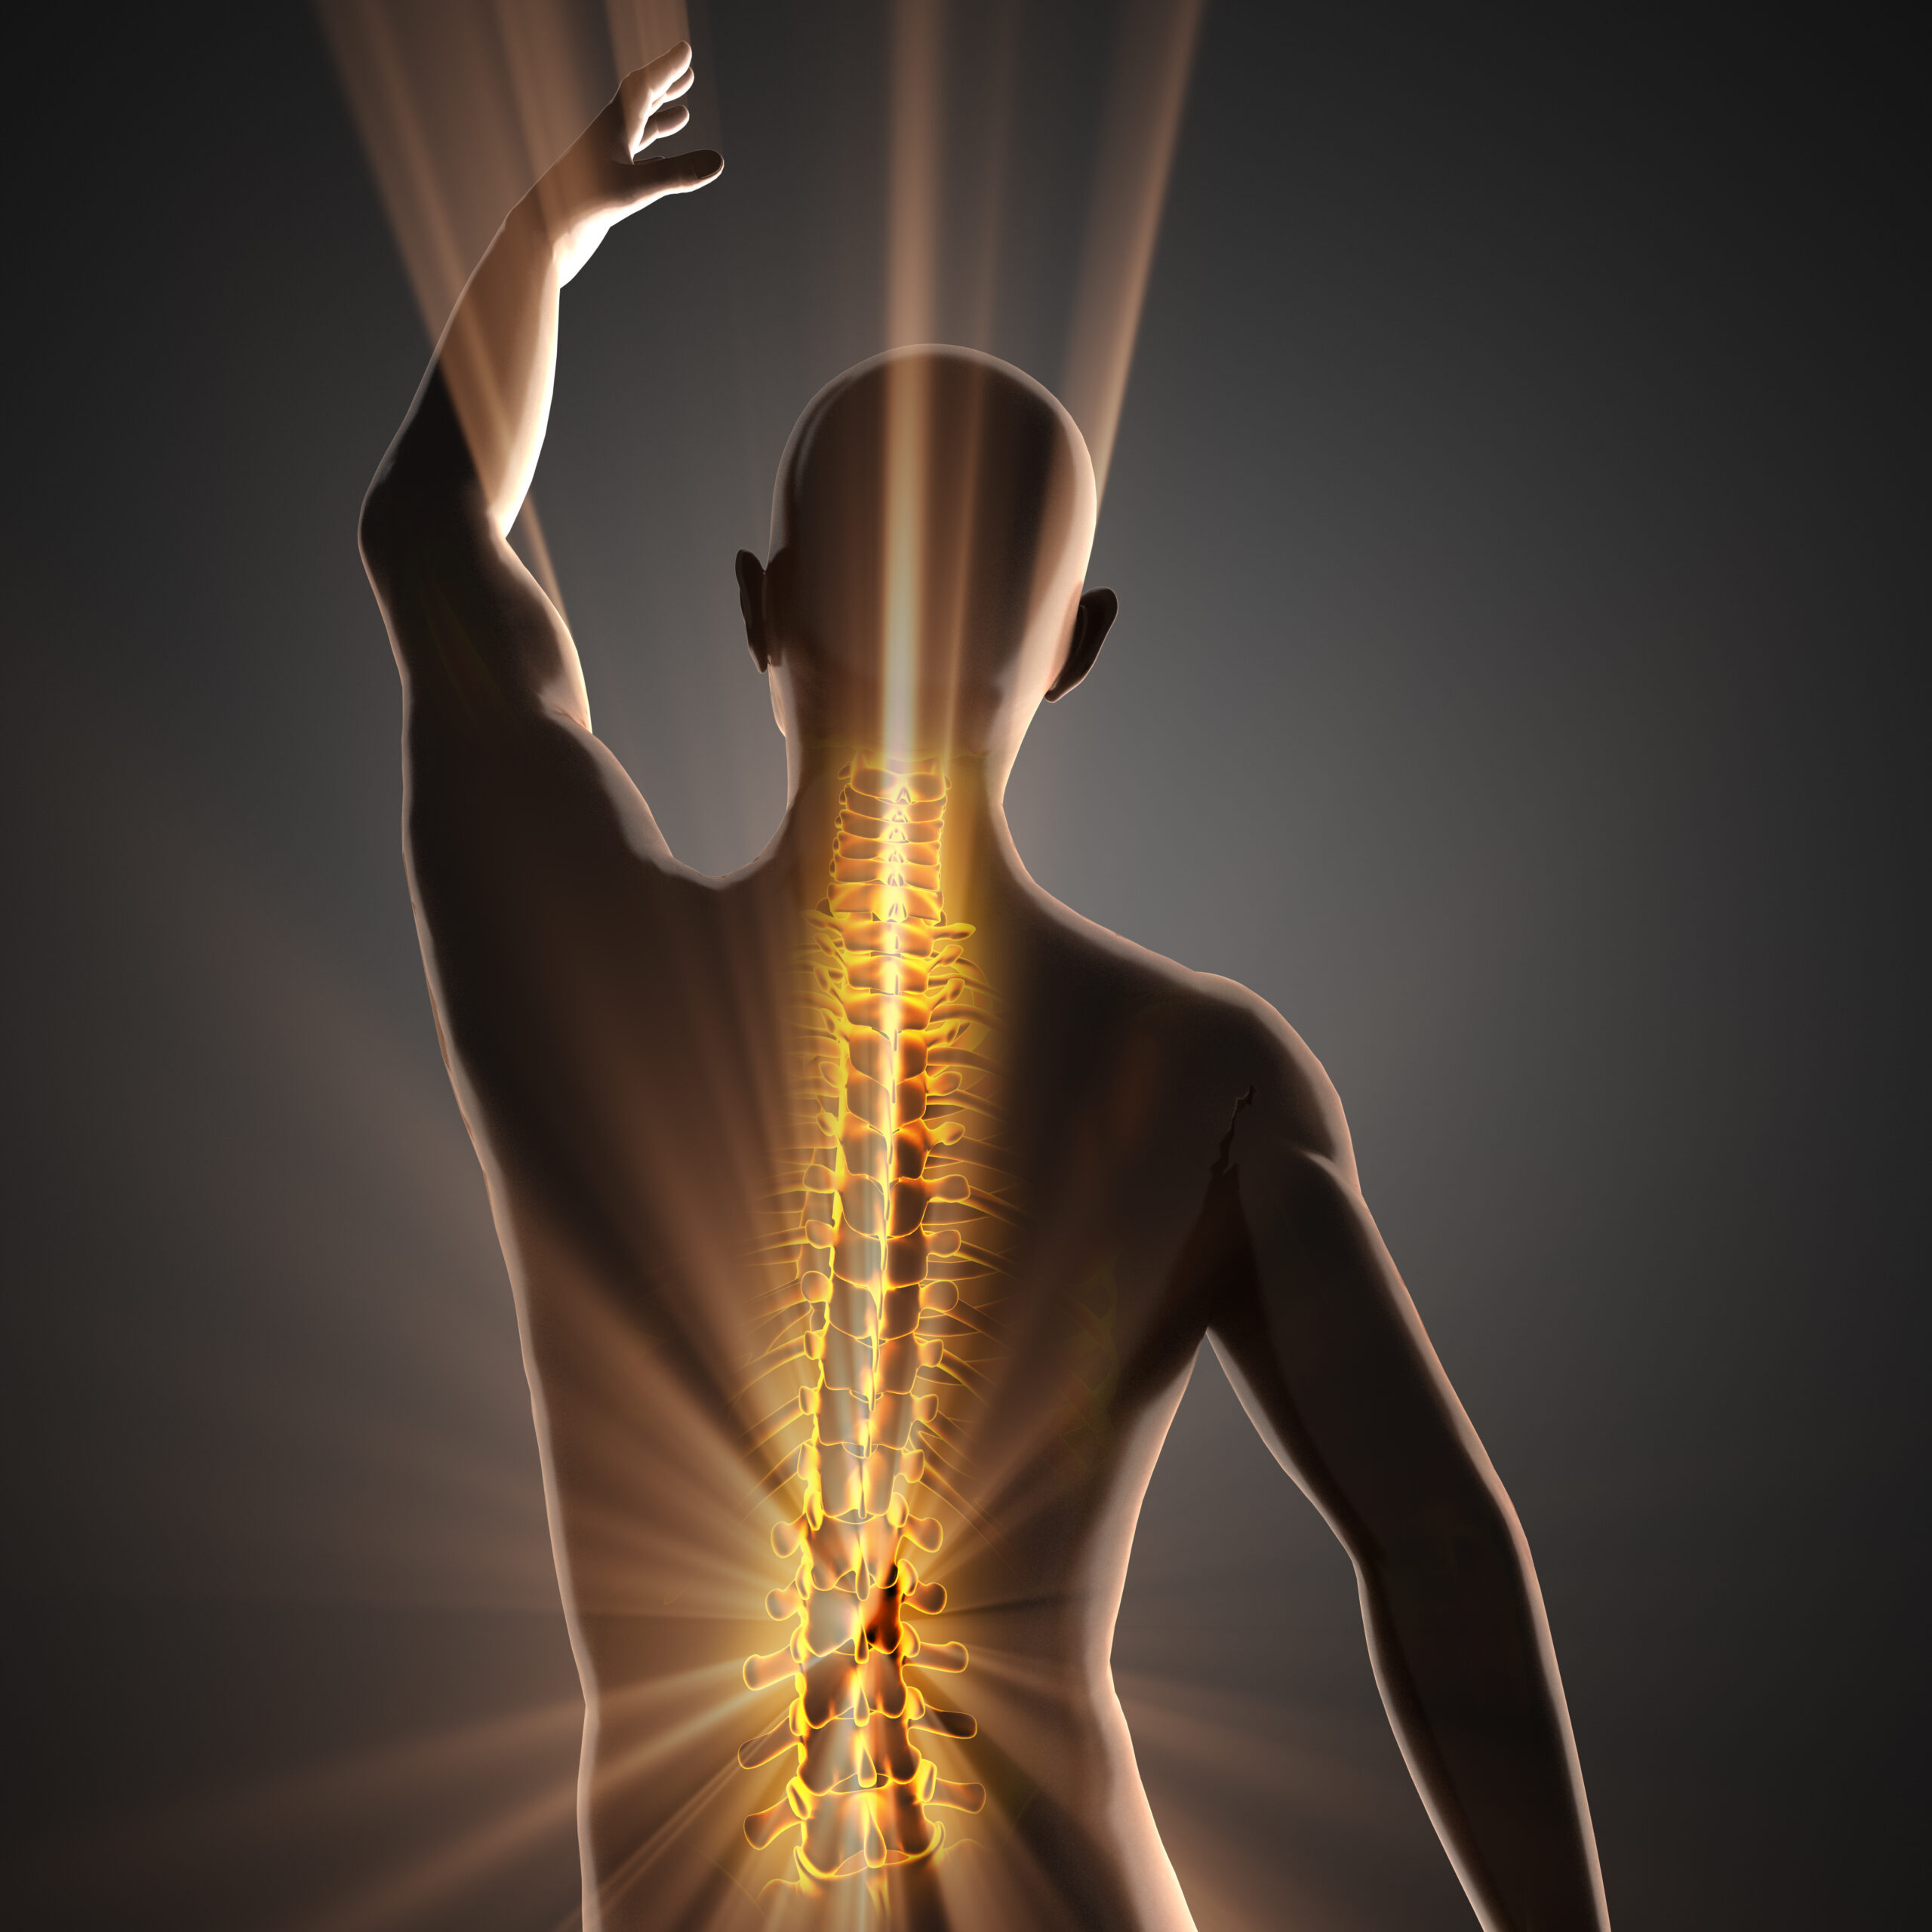 One Time Injection Restores Function After Spinal Cord Injury